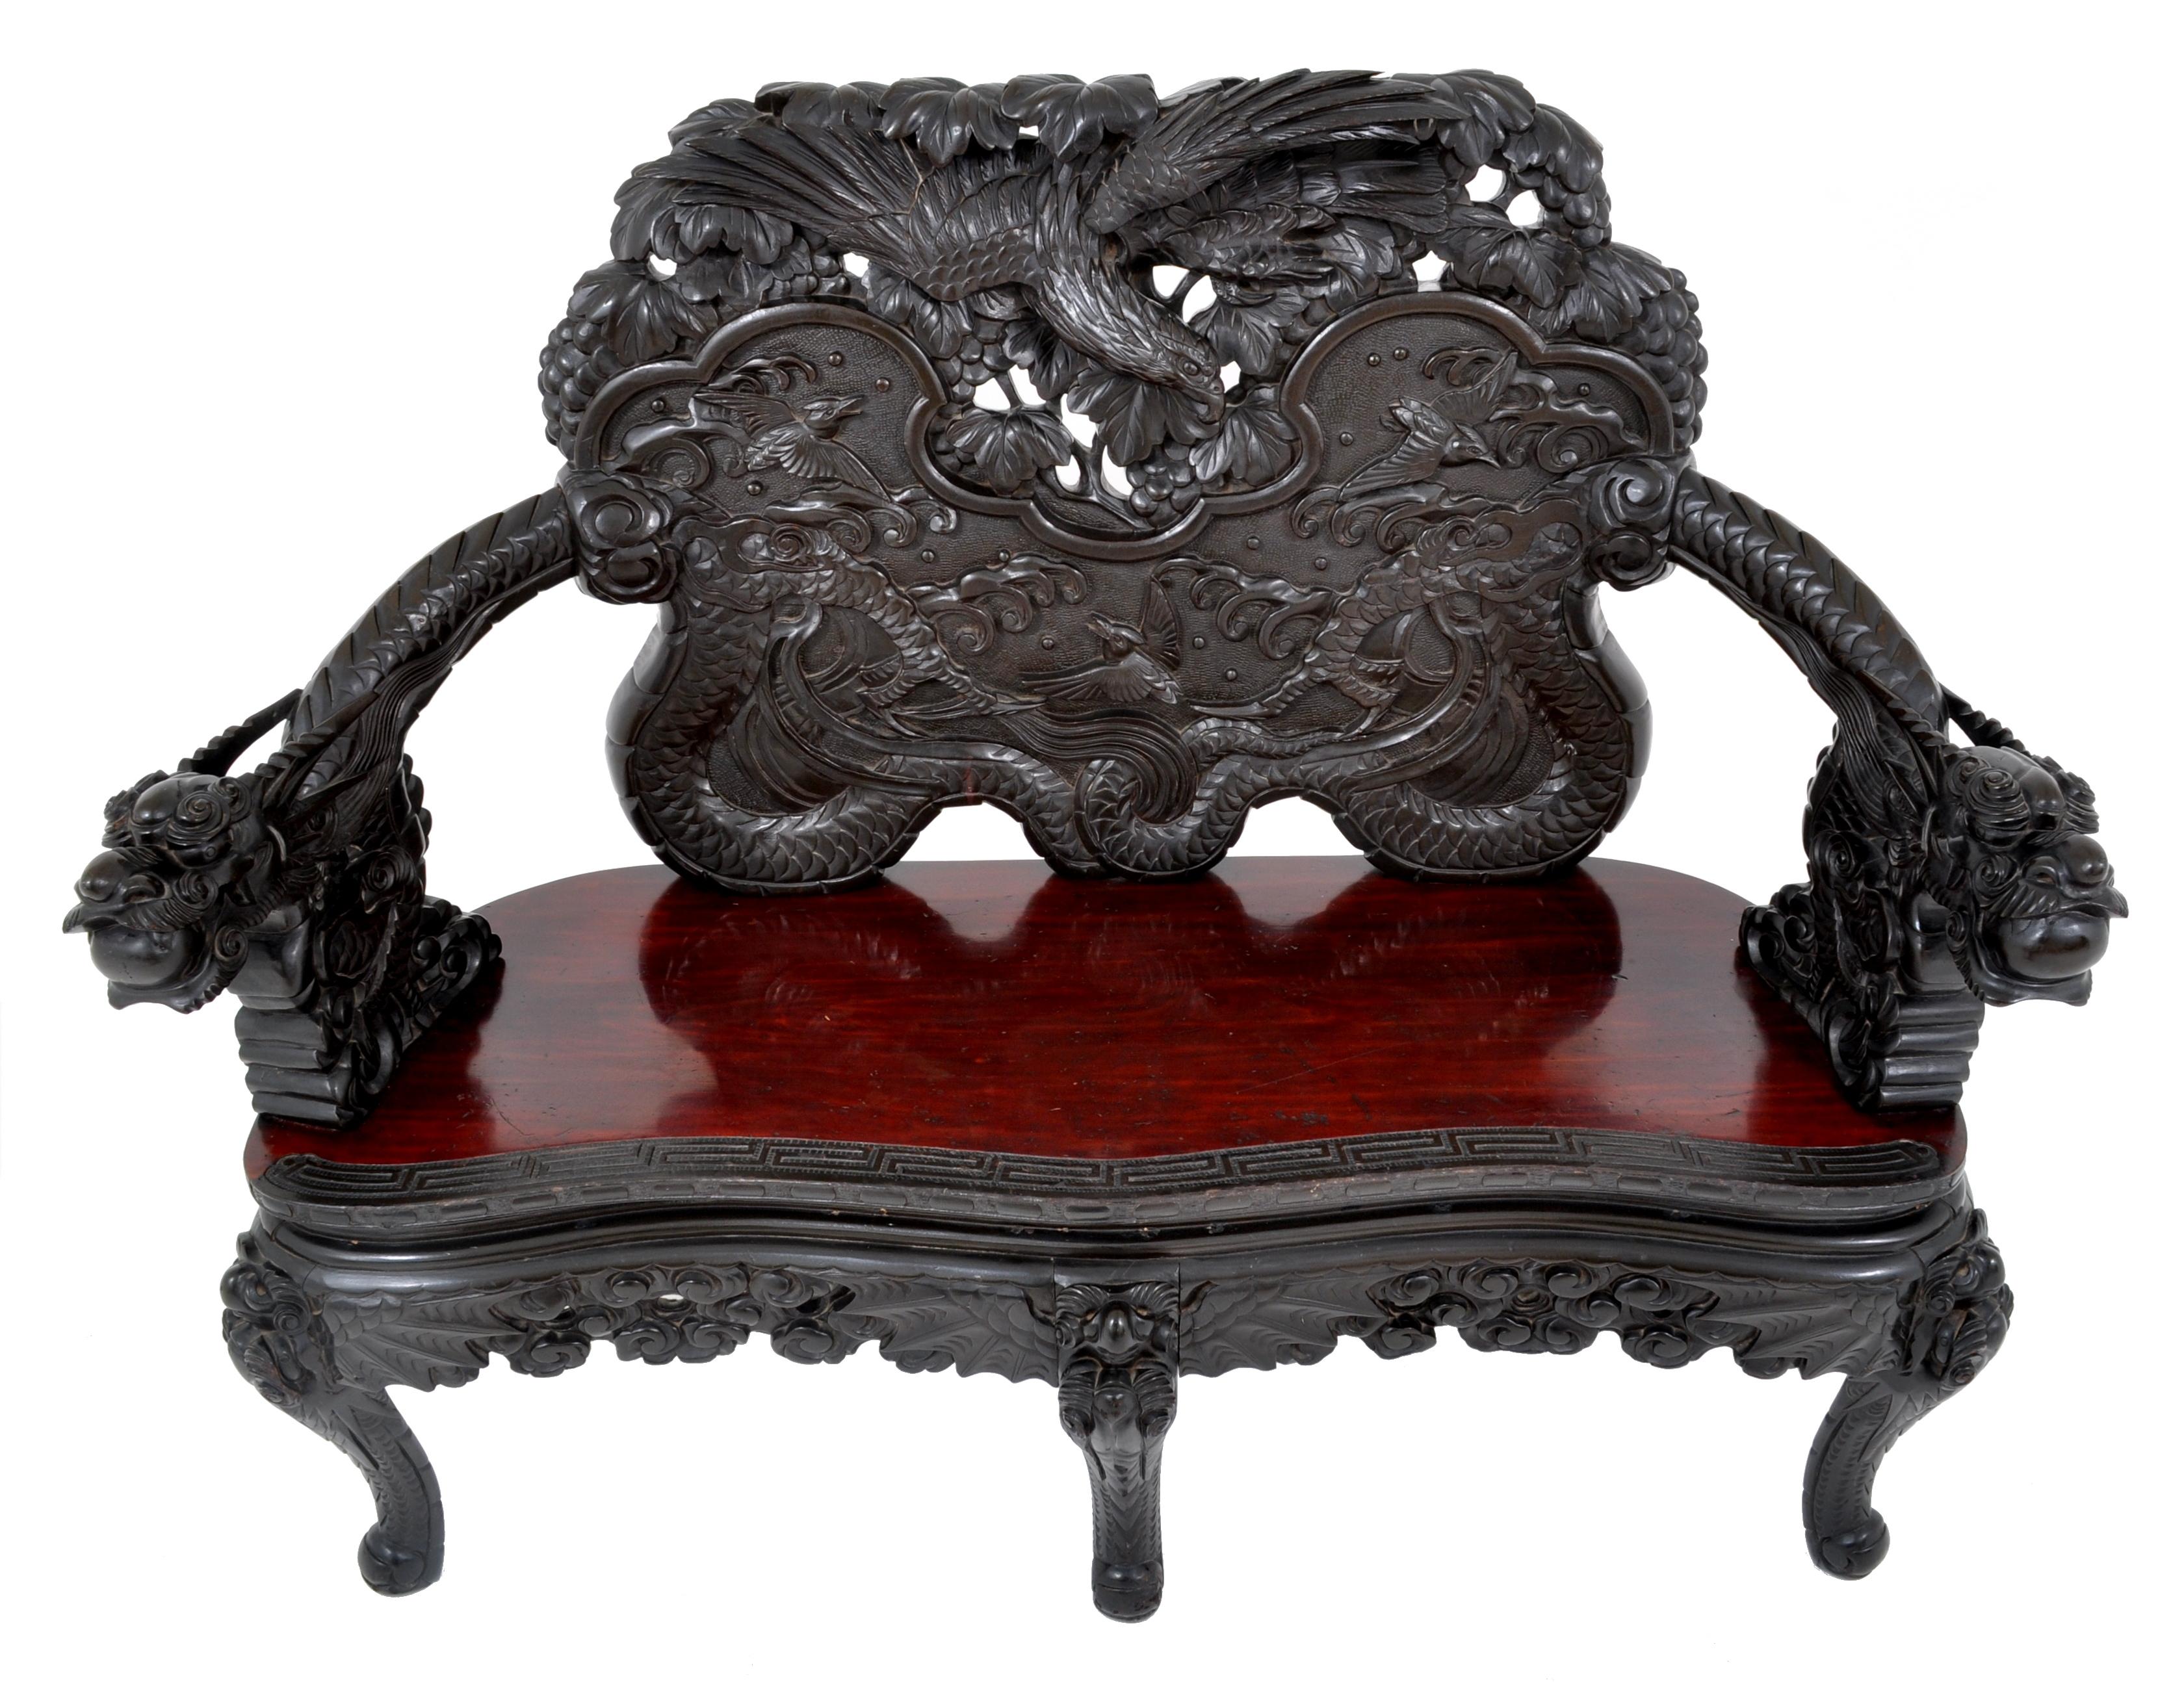 Antique Chinese Qing Dynasty carved rosewood dragon loveseat/sofa/bench, circa1890. This sofa is made for the Chinese market in Japan in the late 19th century. The bench is finely and lavishly carved with a pair of entwined dragons, each with a